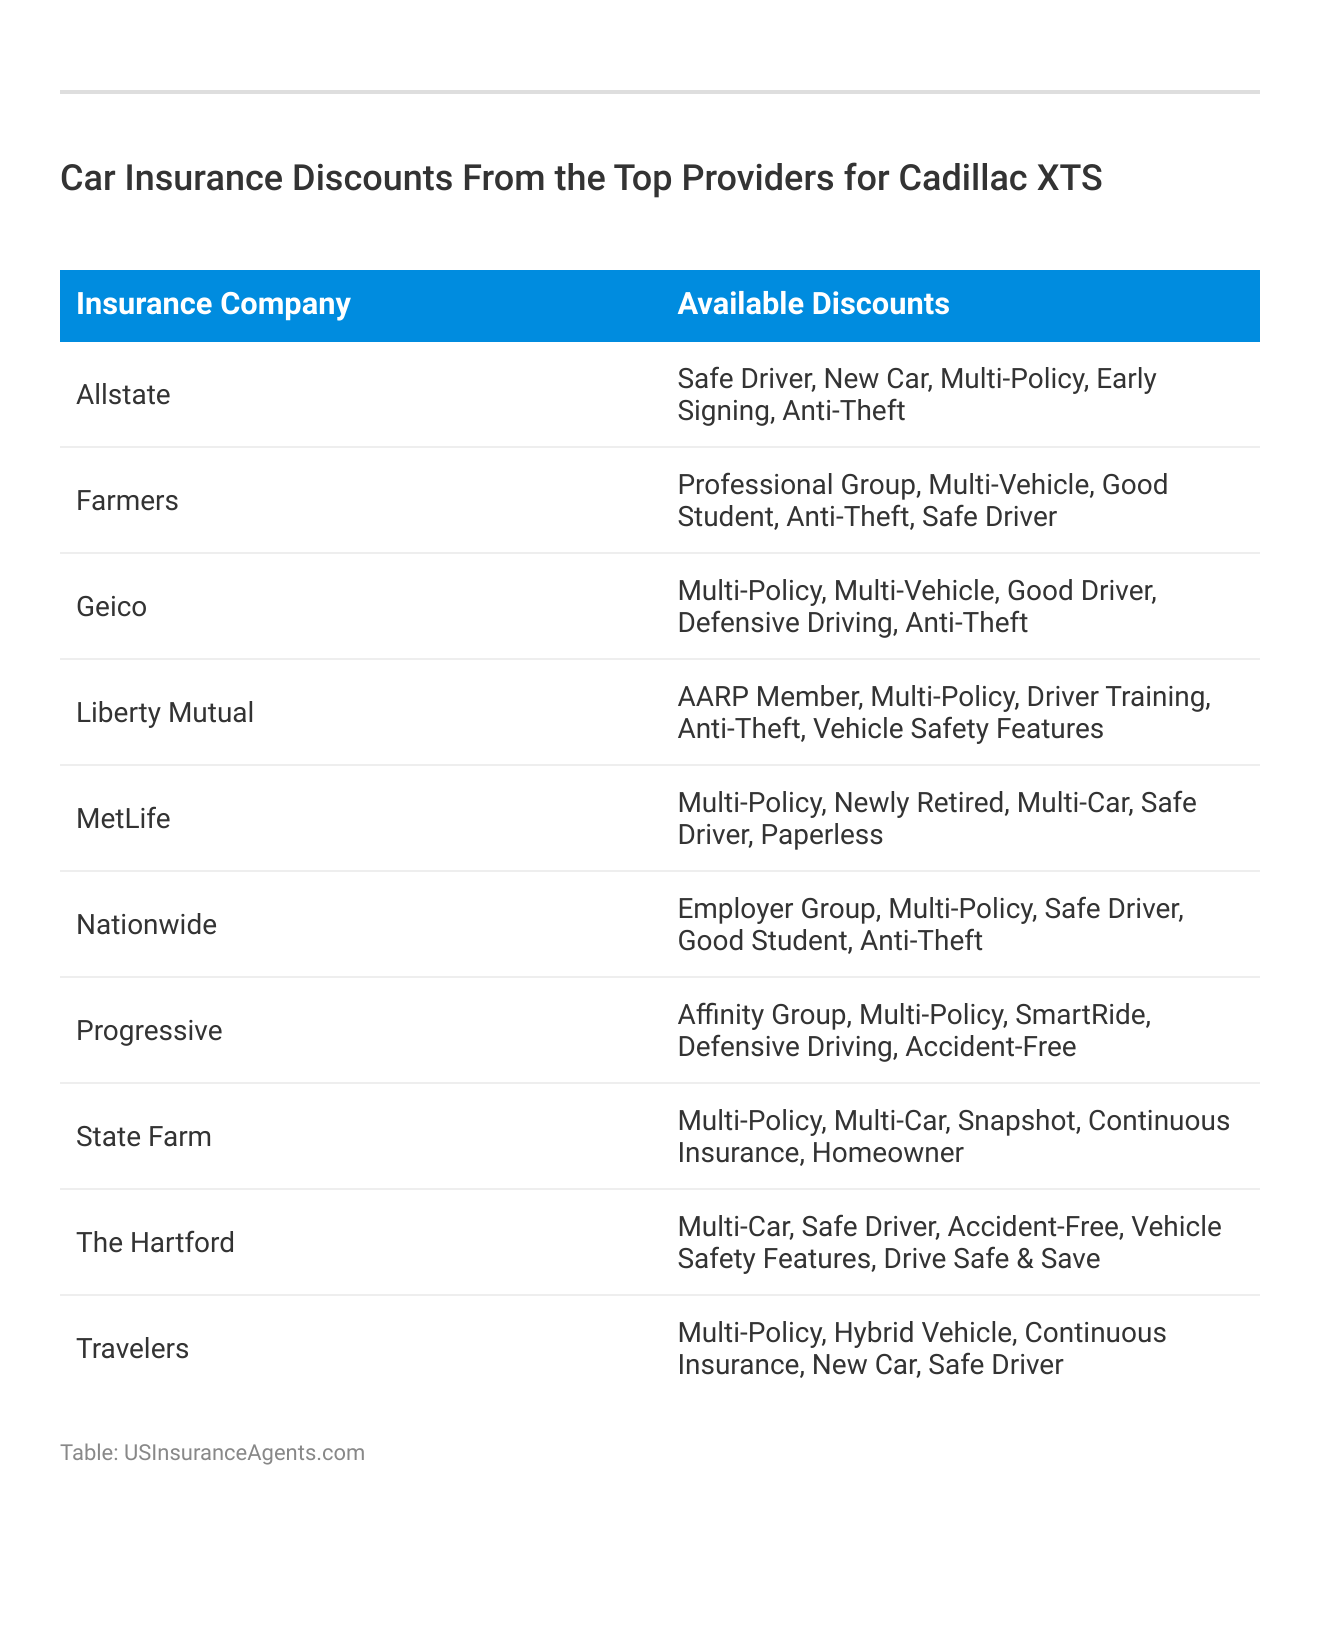 <h3>Car Insurance Discounts From the Top Providers for Cadillac XTS</h3>